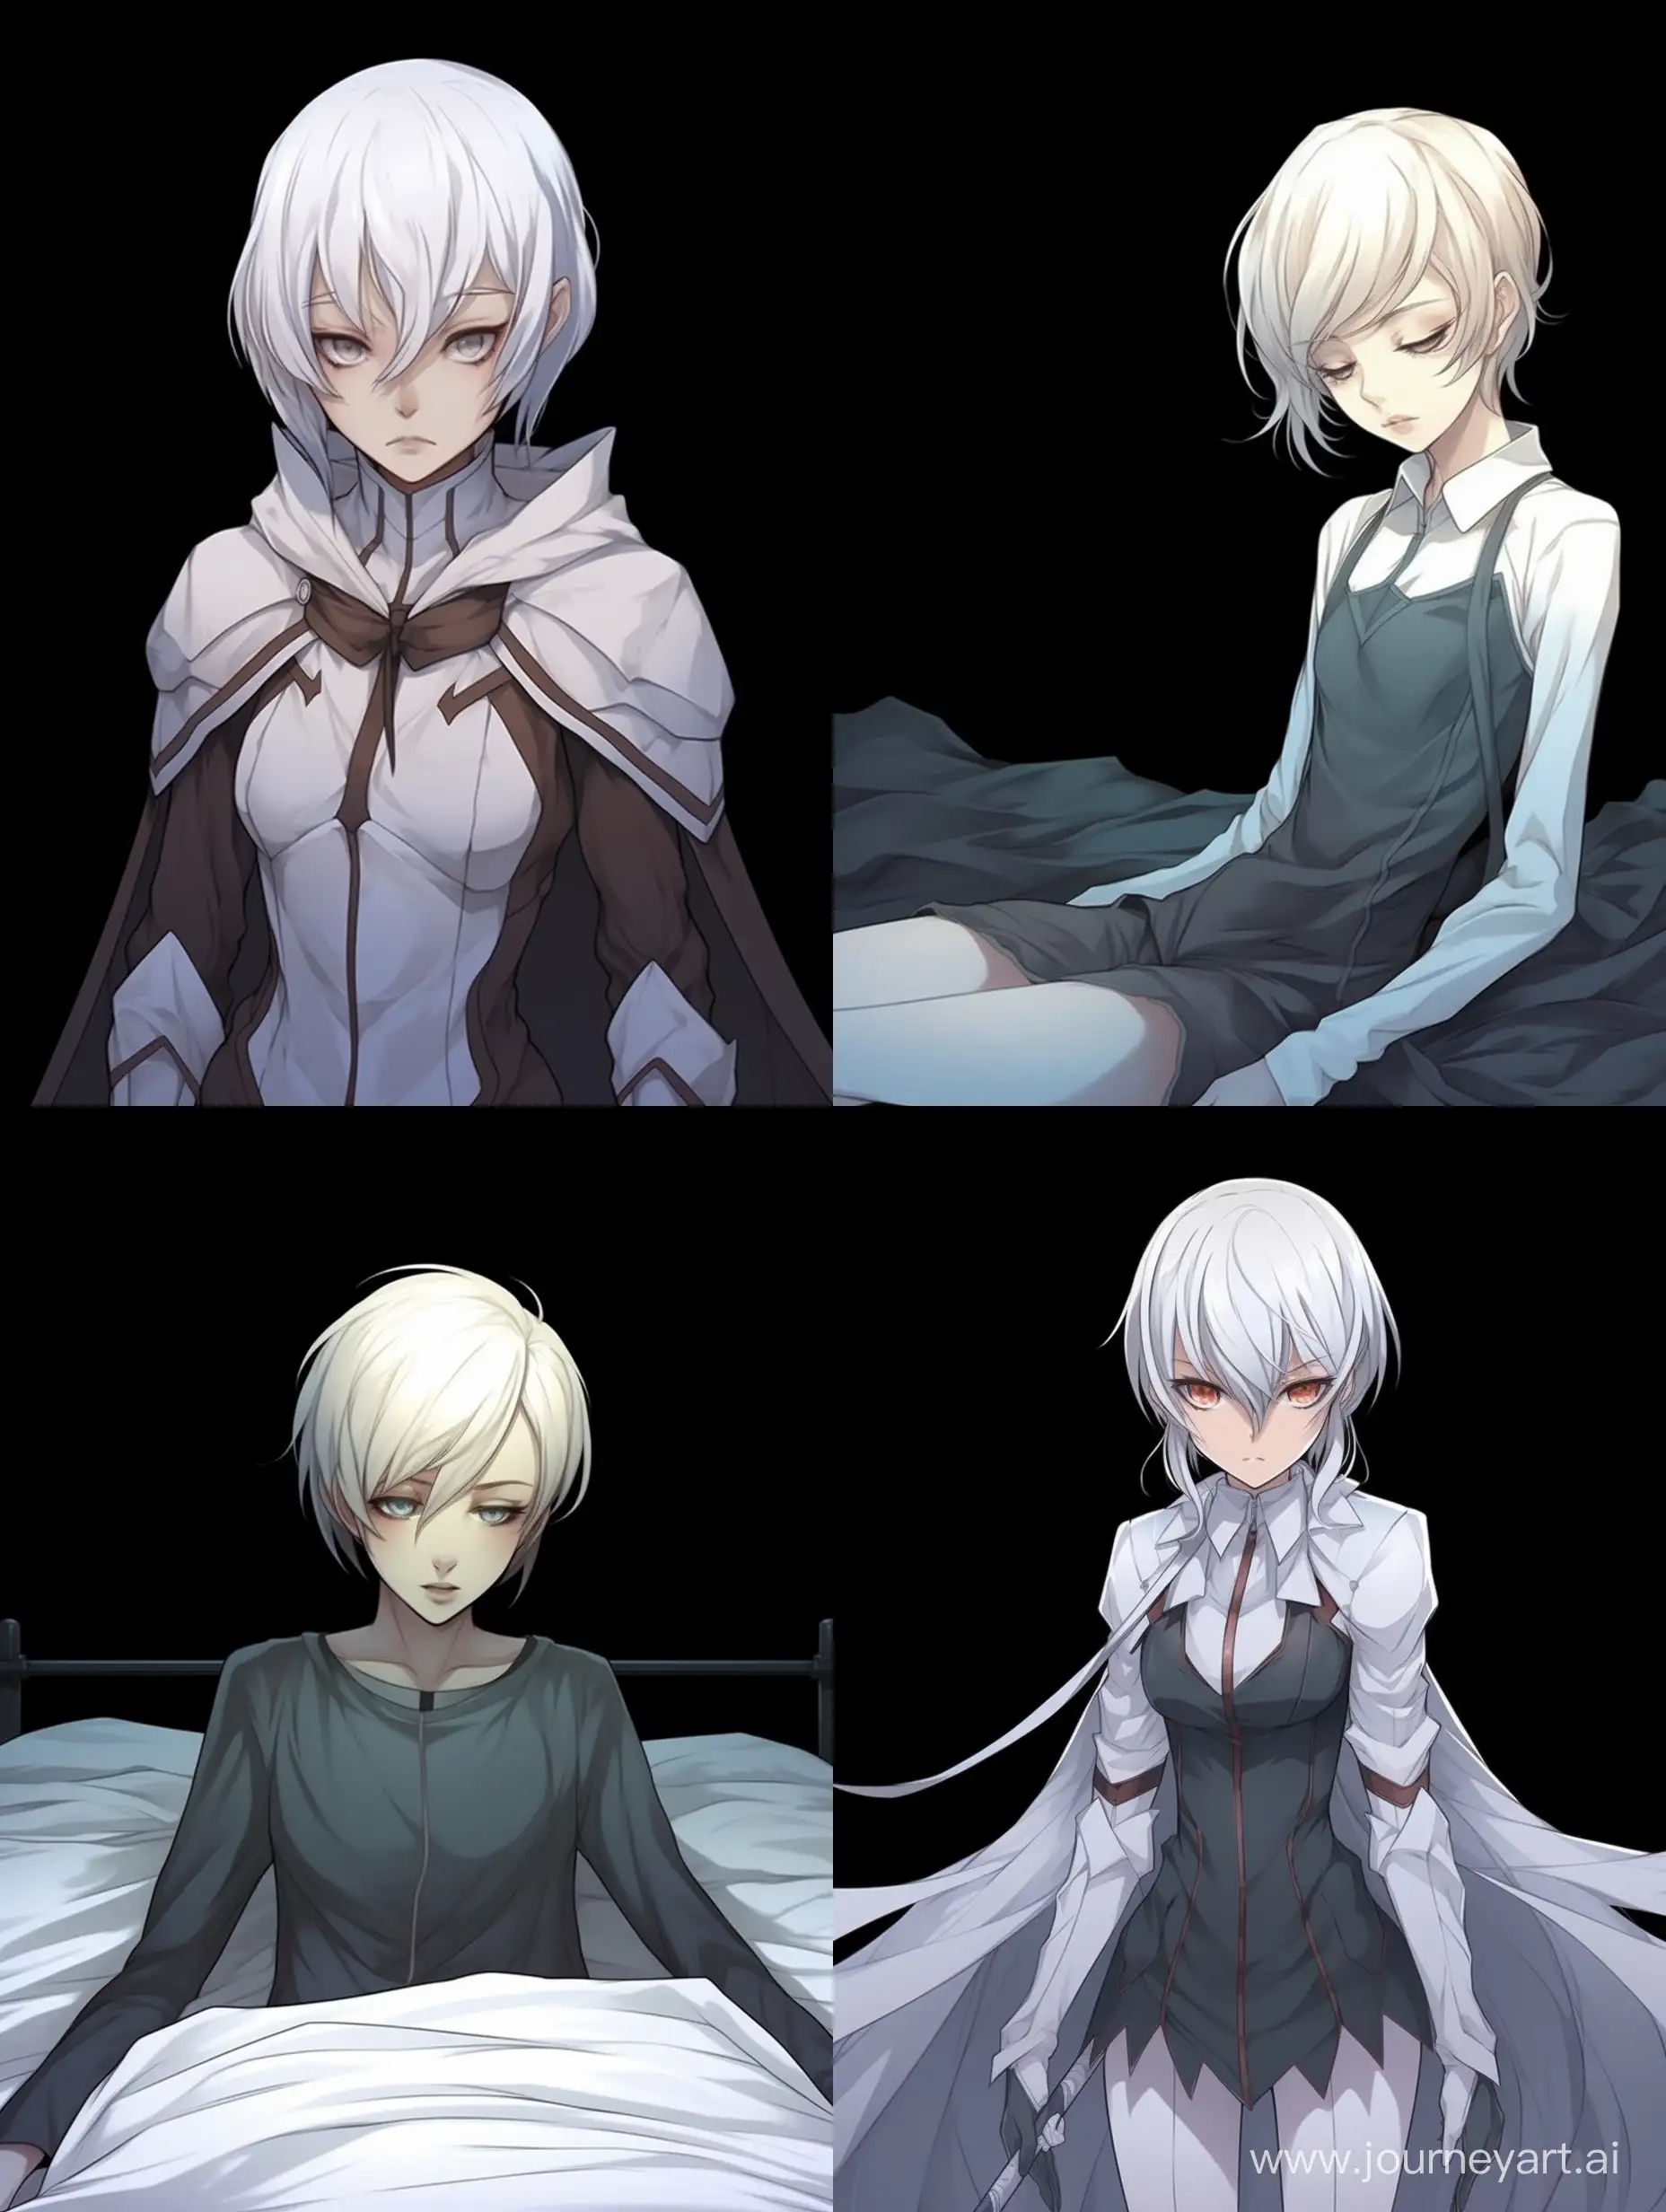 A serious looking woman with pale skin and short white hair average chest.
She has just woken up from cryosleep.
anime character